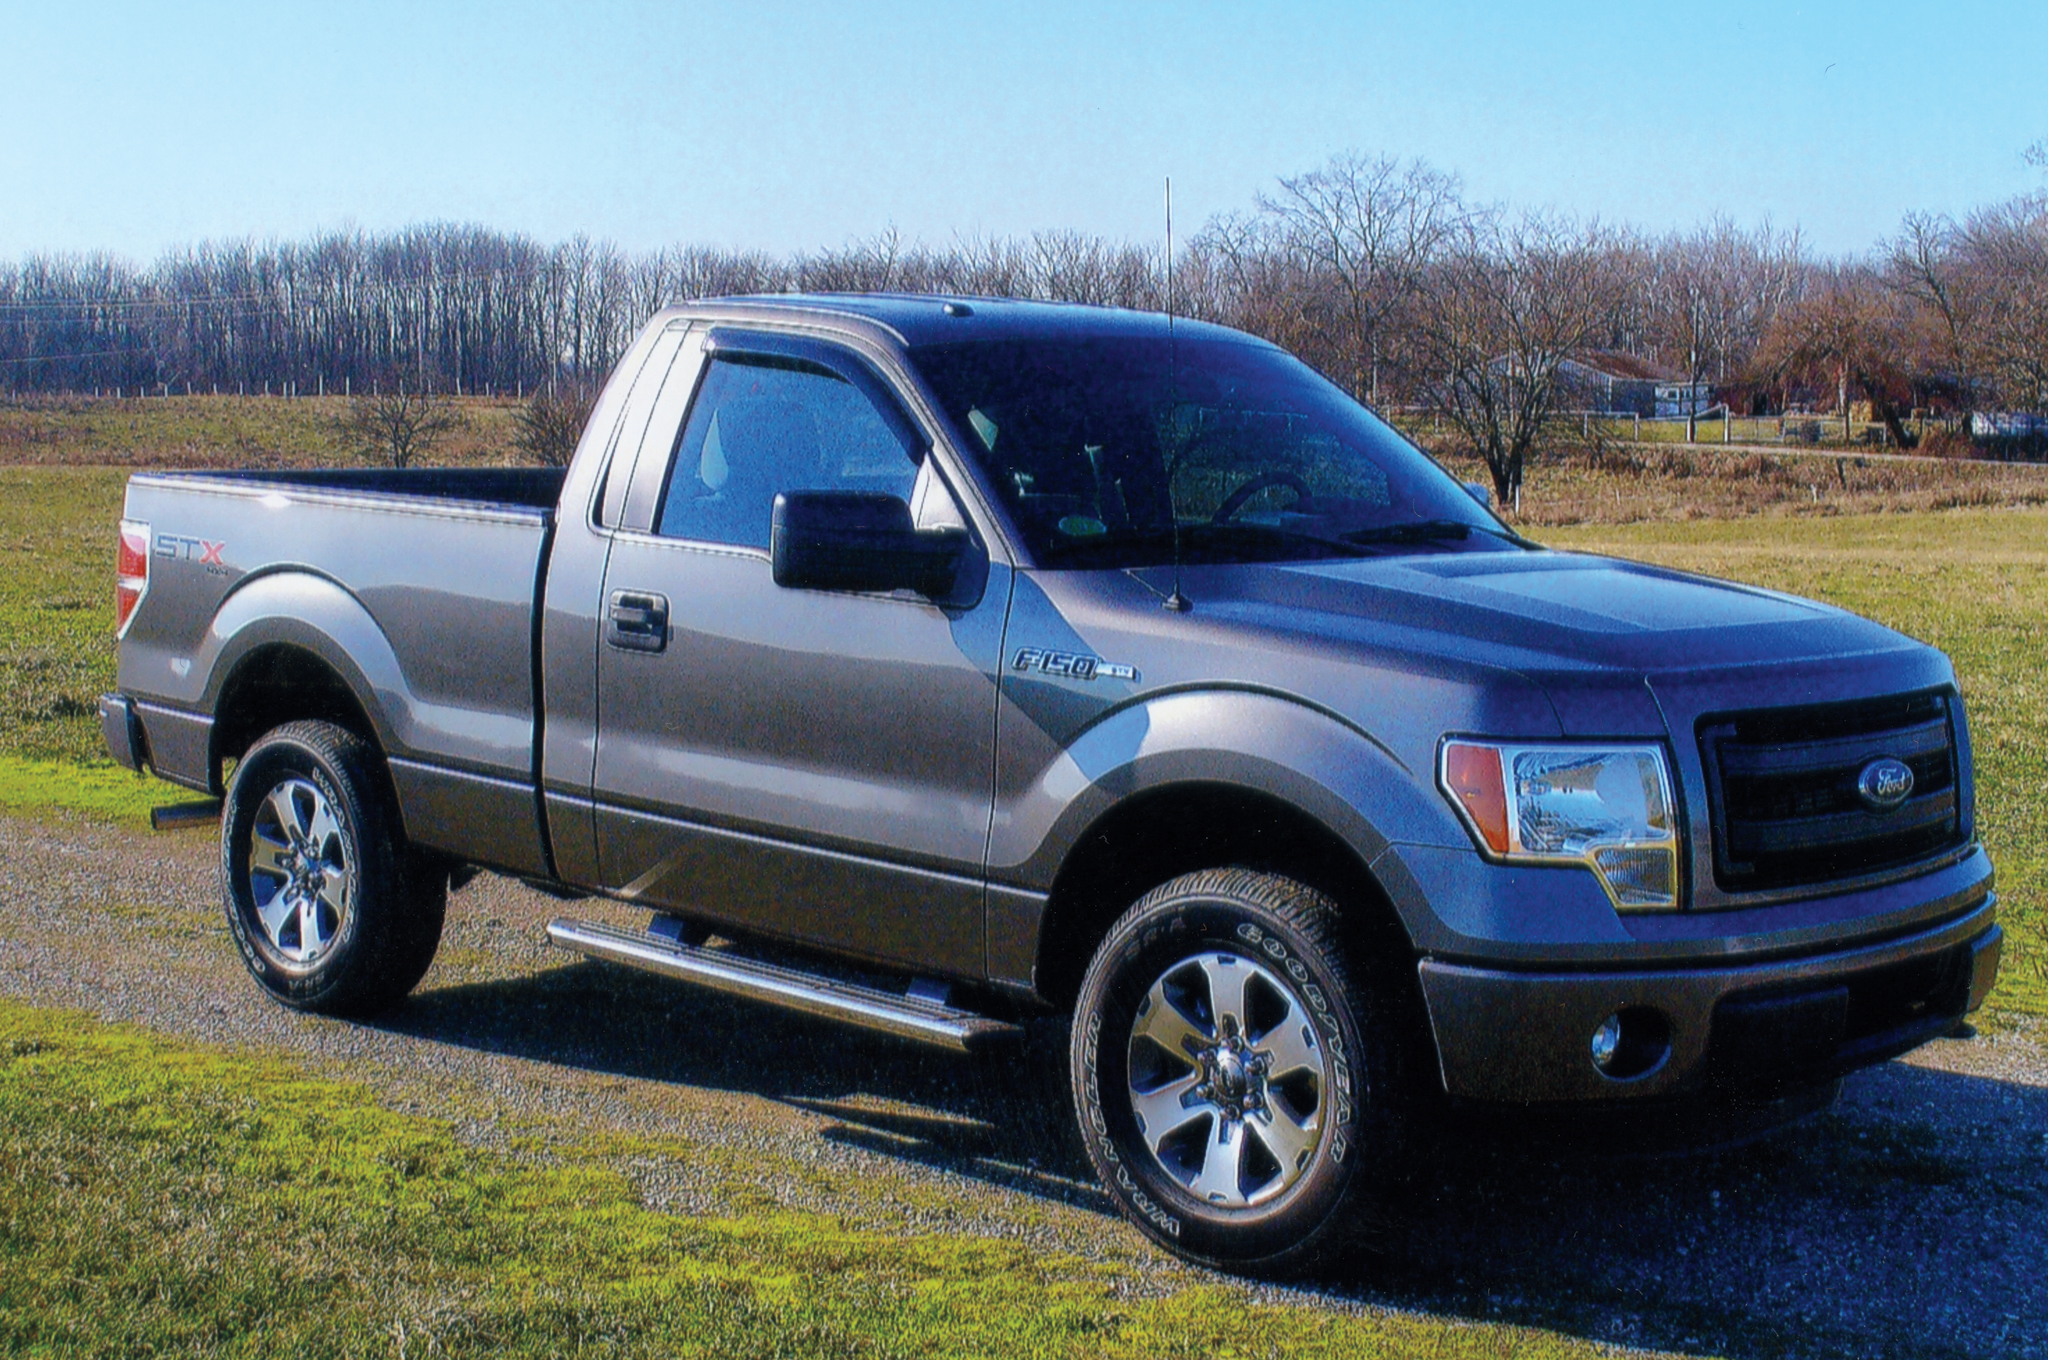 2013 Ford F-150 Backgrounds, Compatible - PC, Mobile, Gadgets 2048x1360 px....